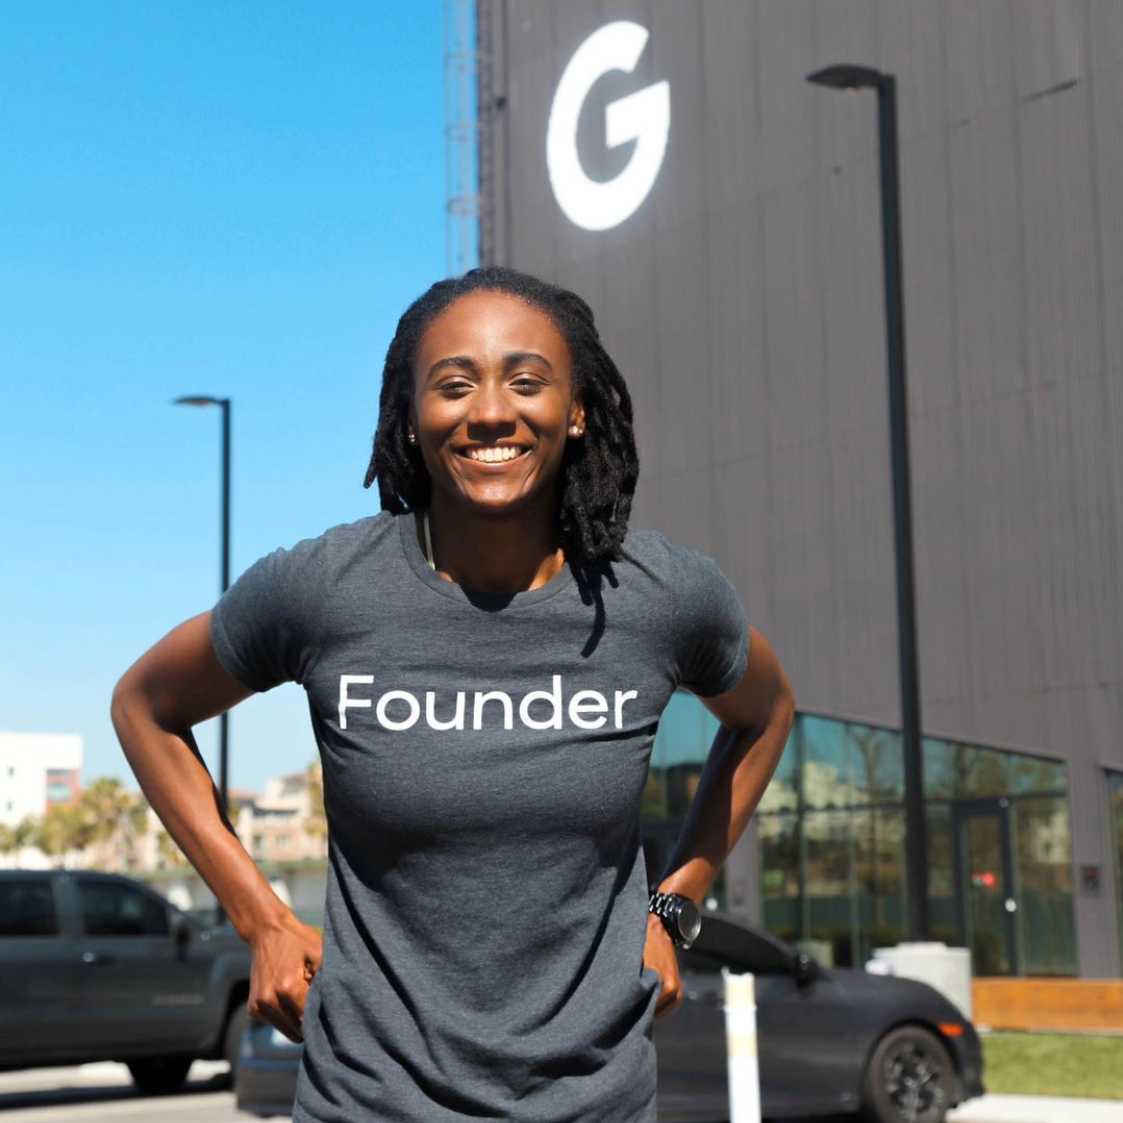 entrepreneur in a founders shirt in front of Google building